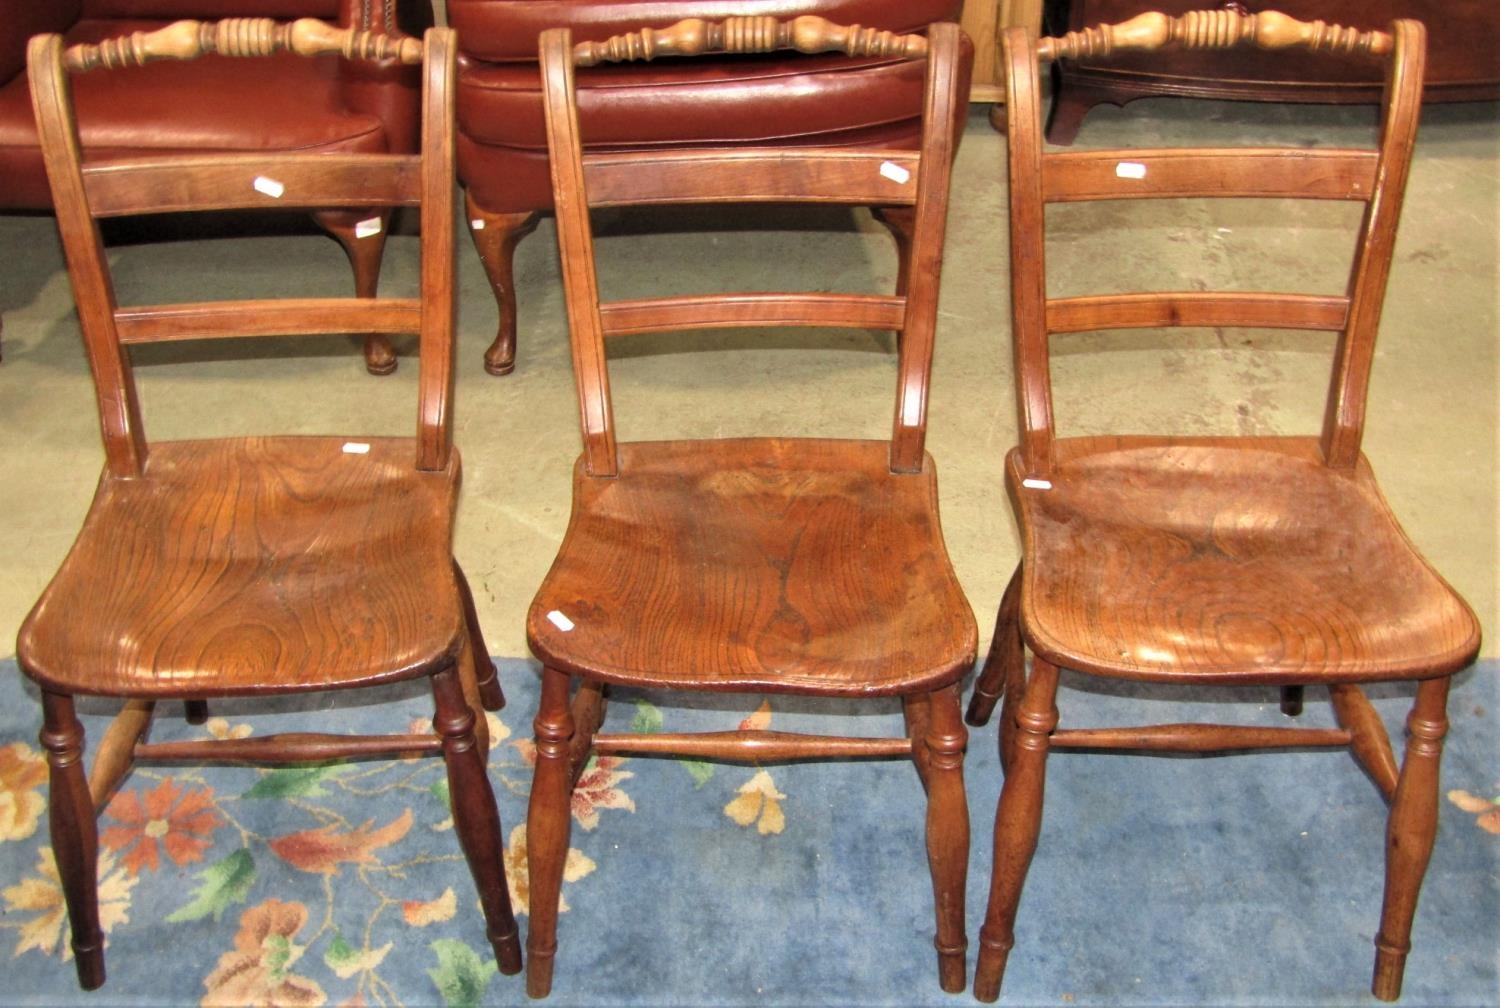 A set of three 19th century Windsor moulded bar back kitchen chairs with turned top rails, - Image 4 of 5